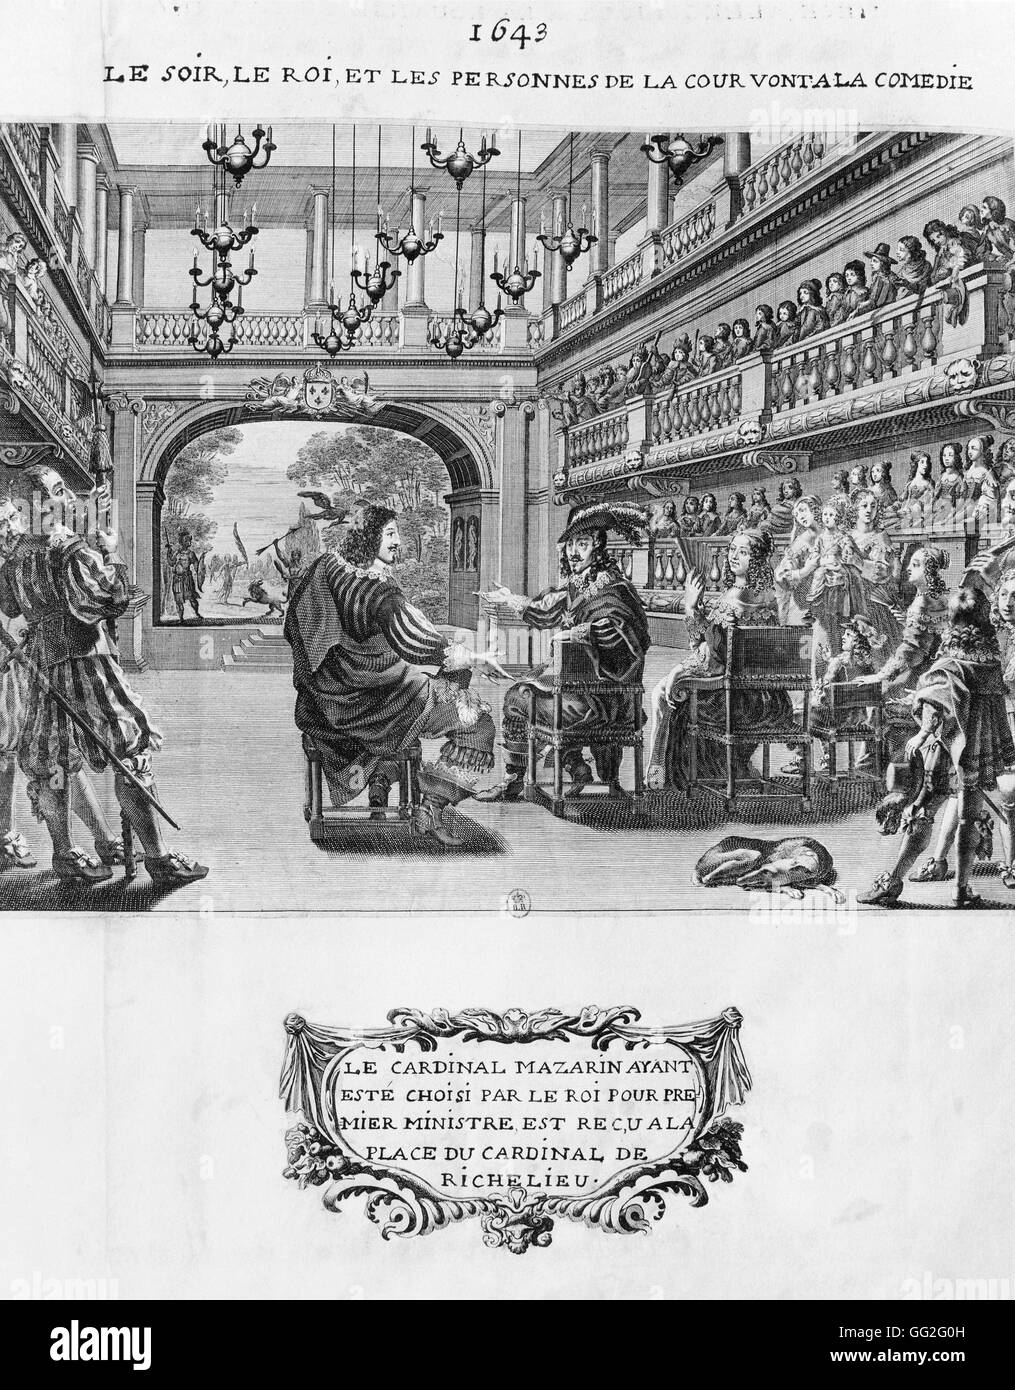 Louis XIII of France with his minister Mazarin, and the members of the court viewing a comedy Engraving 1643 Paris, Bibliotheque Nationale de France Stock Photo